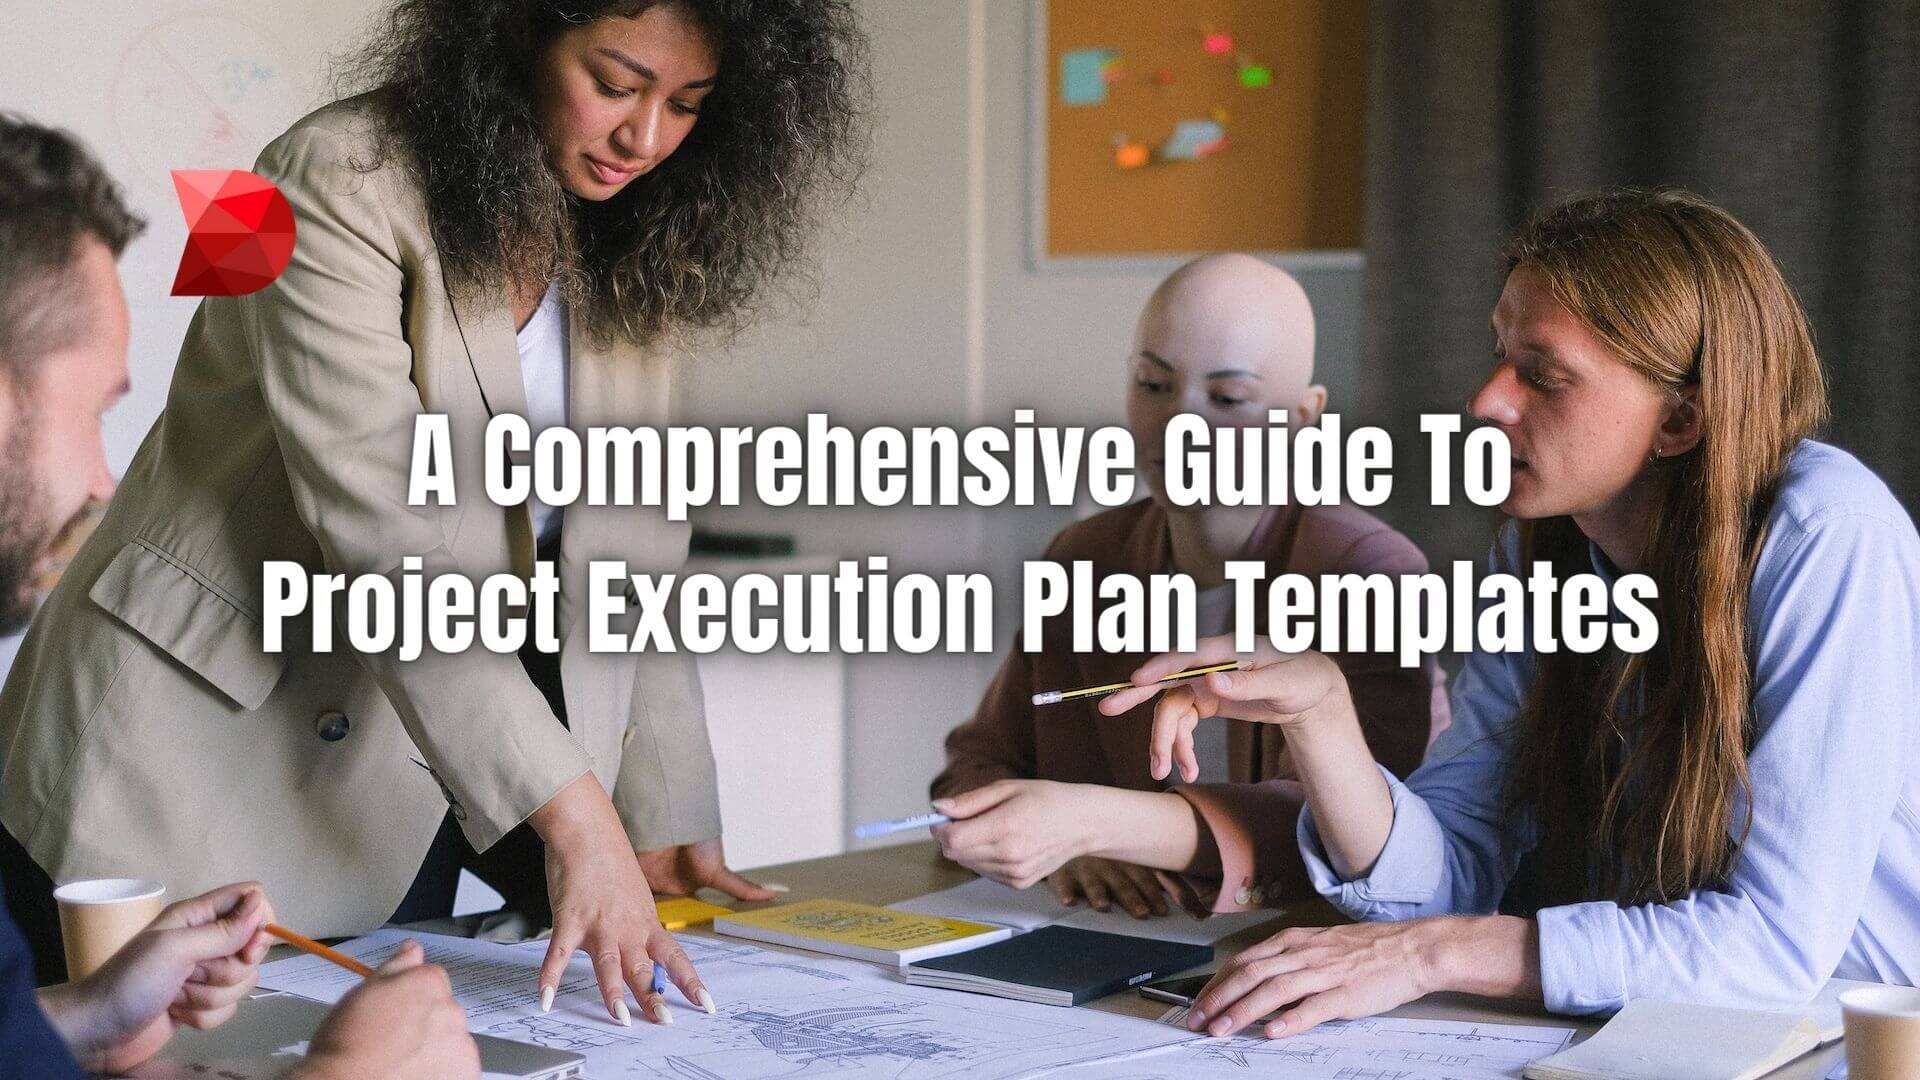 Having a project execution plan is essential for success. Here's how to confidently create your successful project execution plan template!